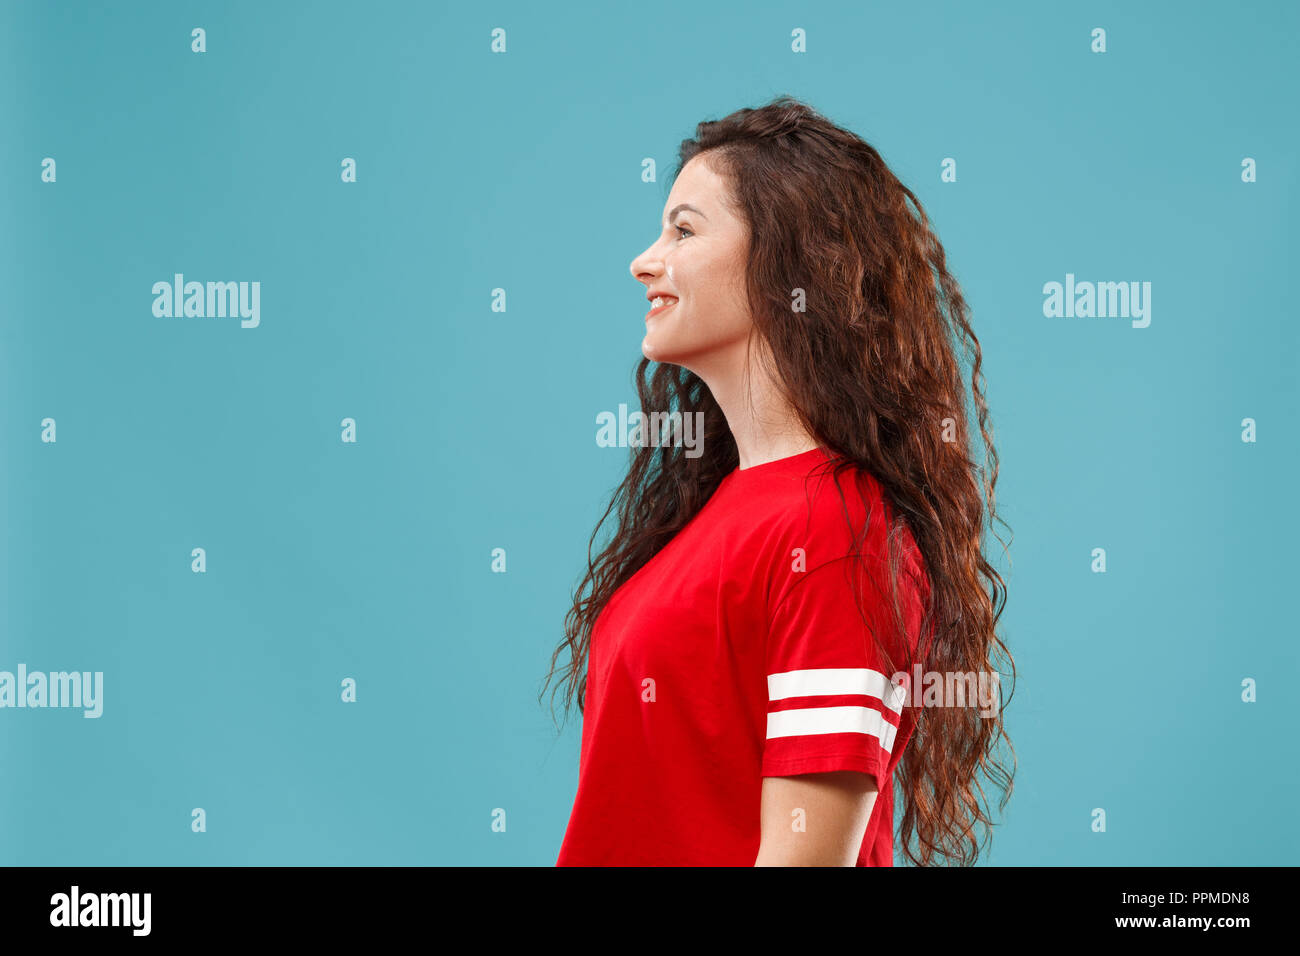 Happy business woman standing and smiling isolated on blue studio background. Beautiful female half-length portrait. Young emotional woman. The human emotions, facial expression concept. Profile view. Stock Photo